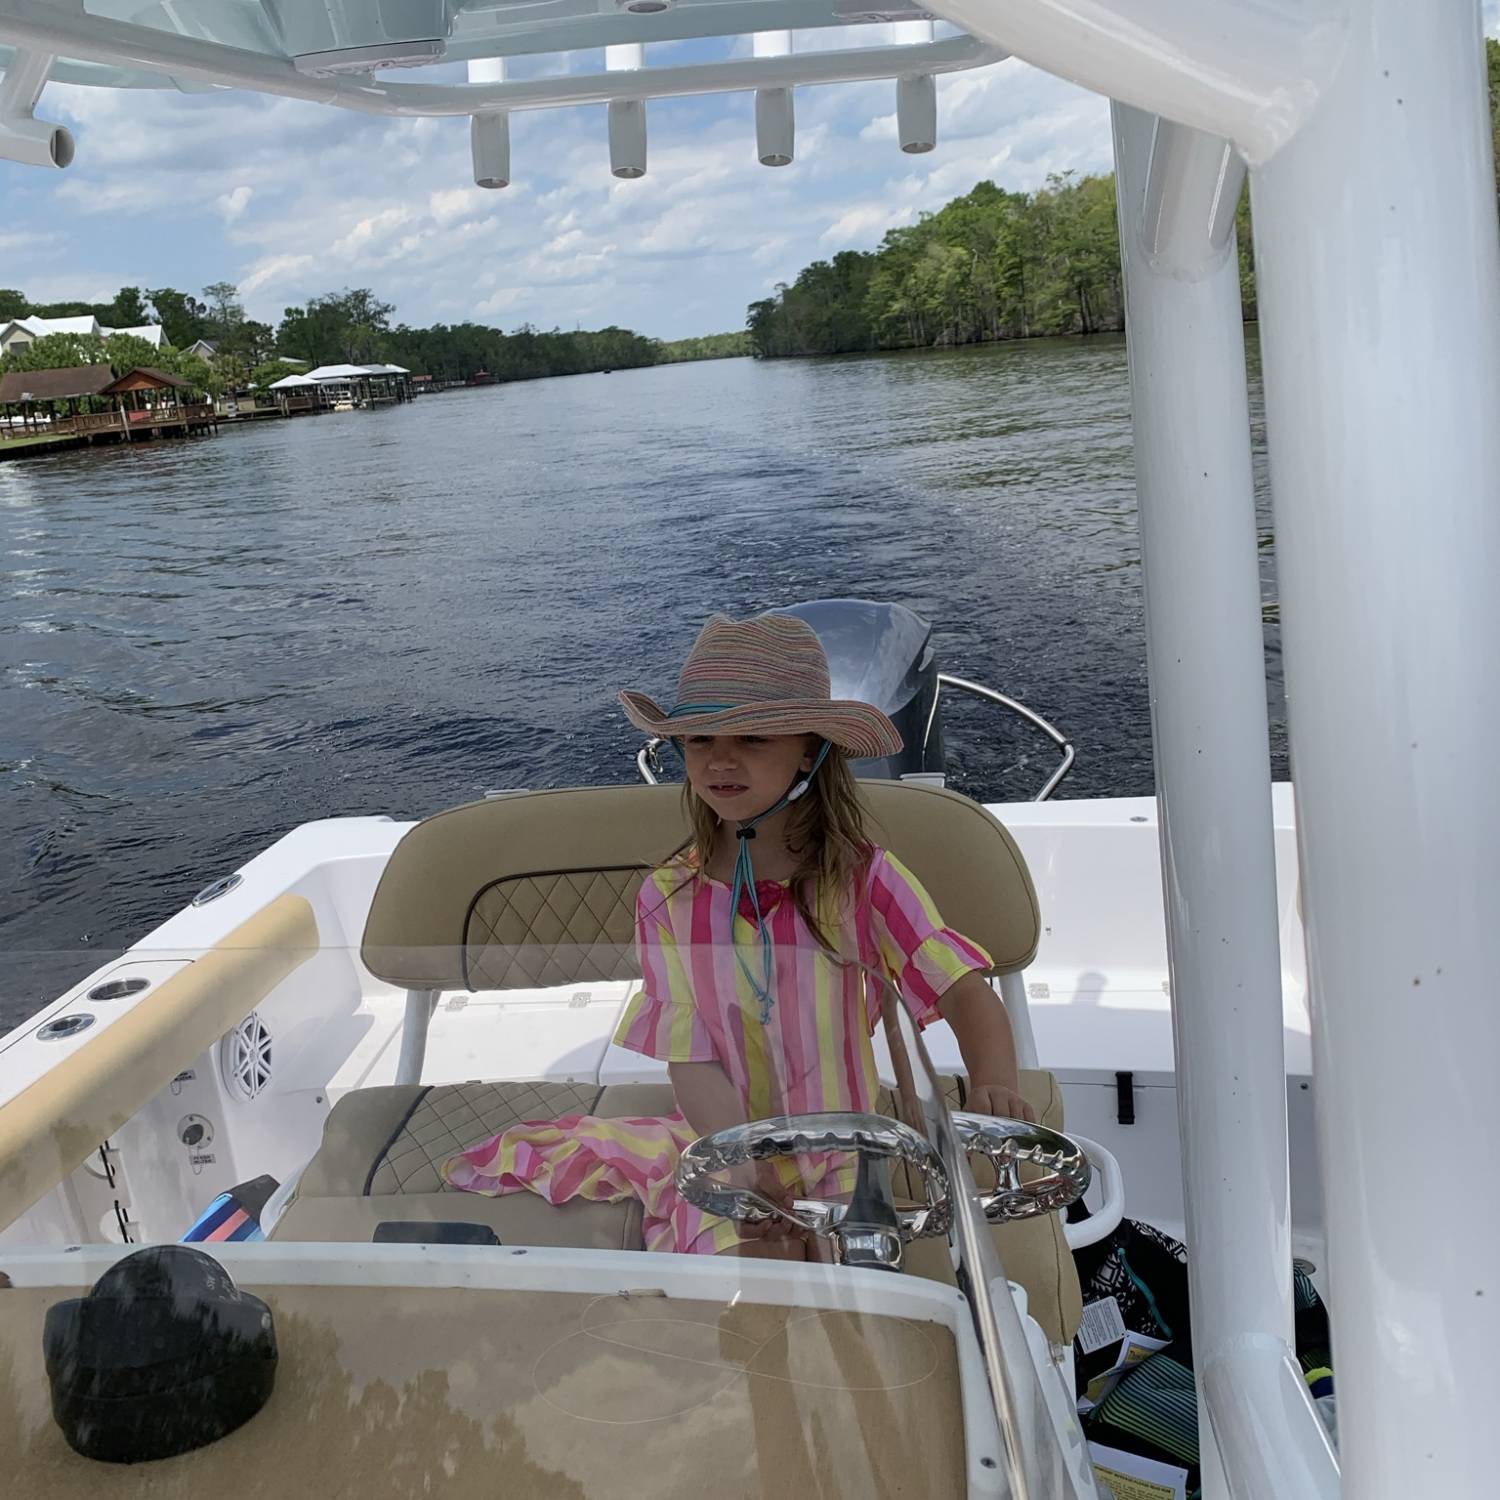 The Little Miss Myrtle beach 2022 pageant queen has taken the helm and is definitely the princess of the sandbar....